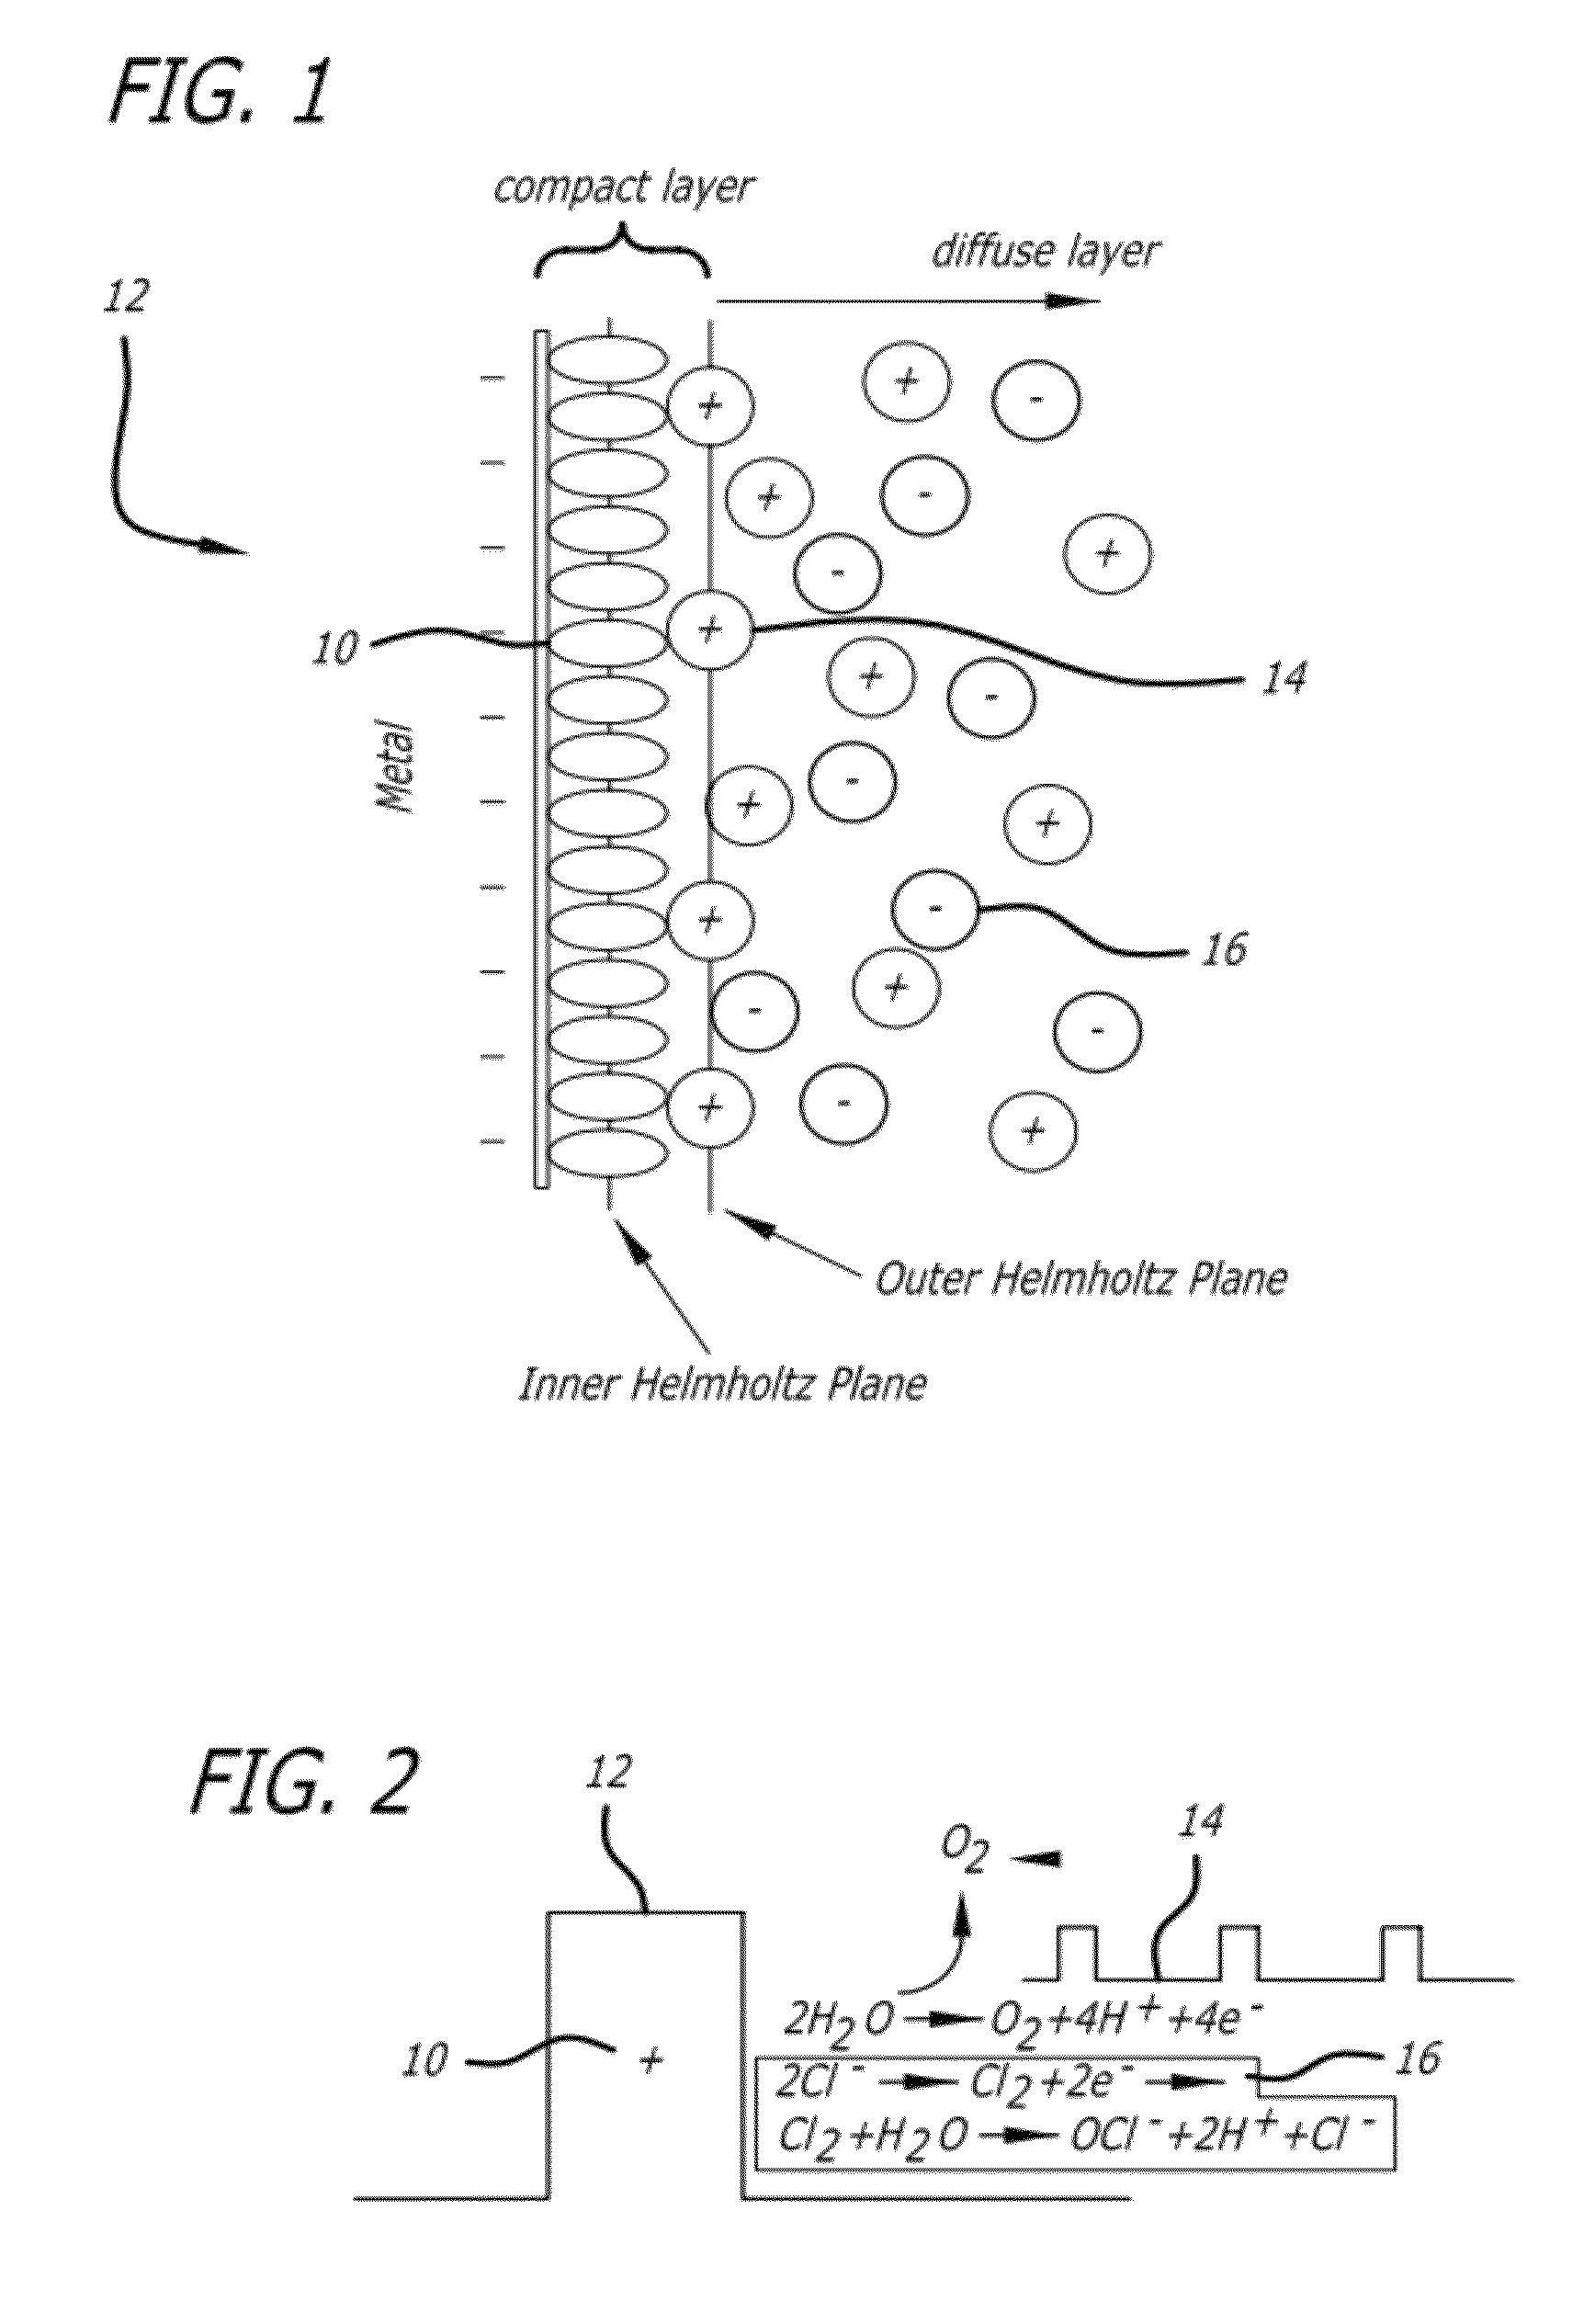 Method and apparatus for treating ischemic diseases